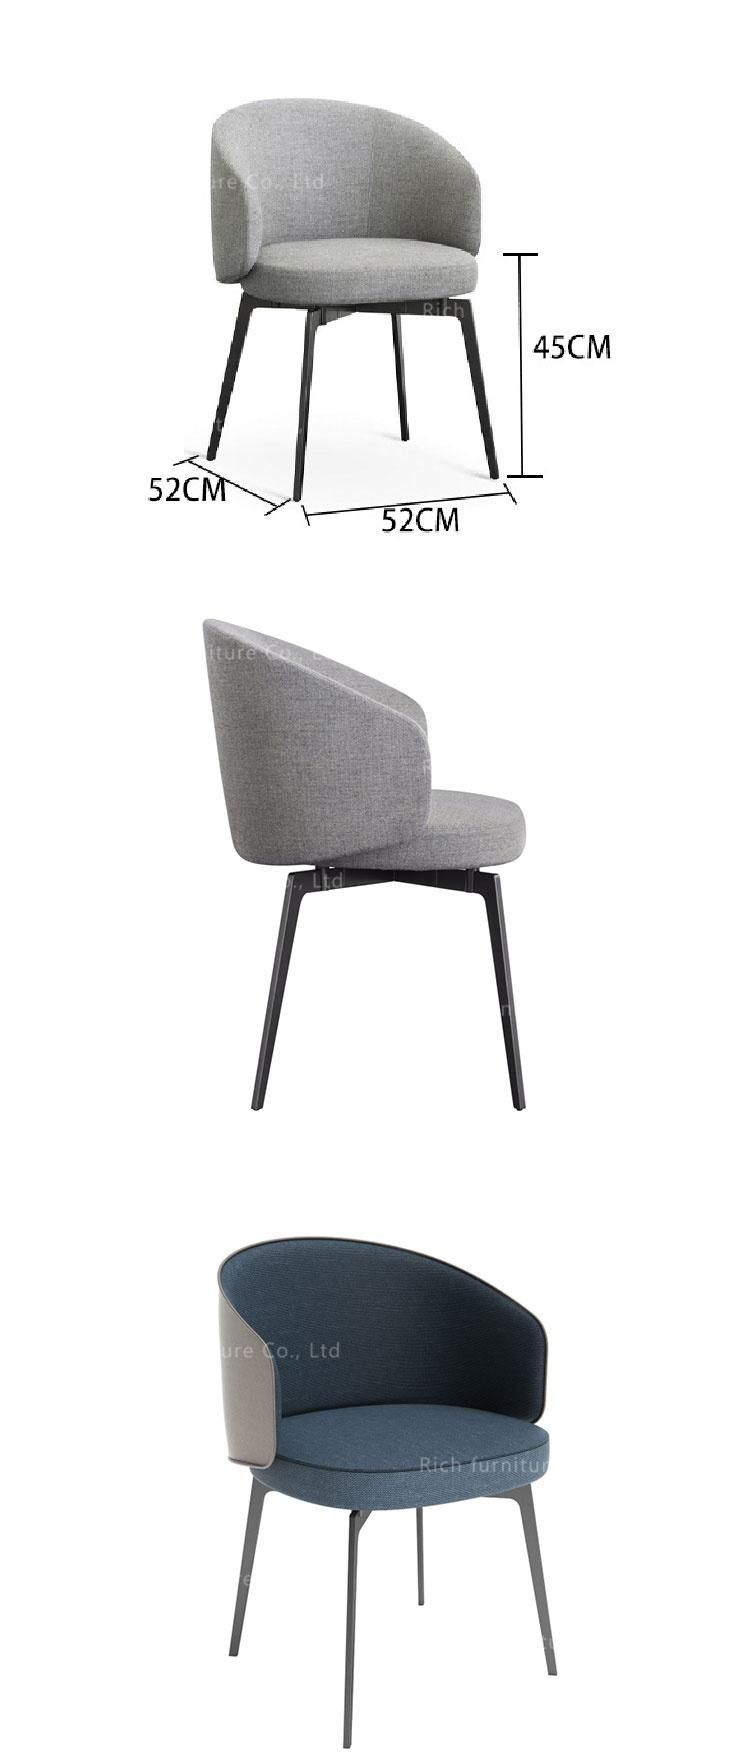 Black Metal Legs Armchair Restaurant Used Fabric Dining Chairs